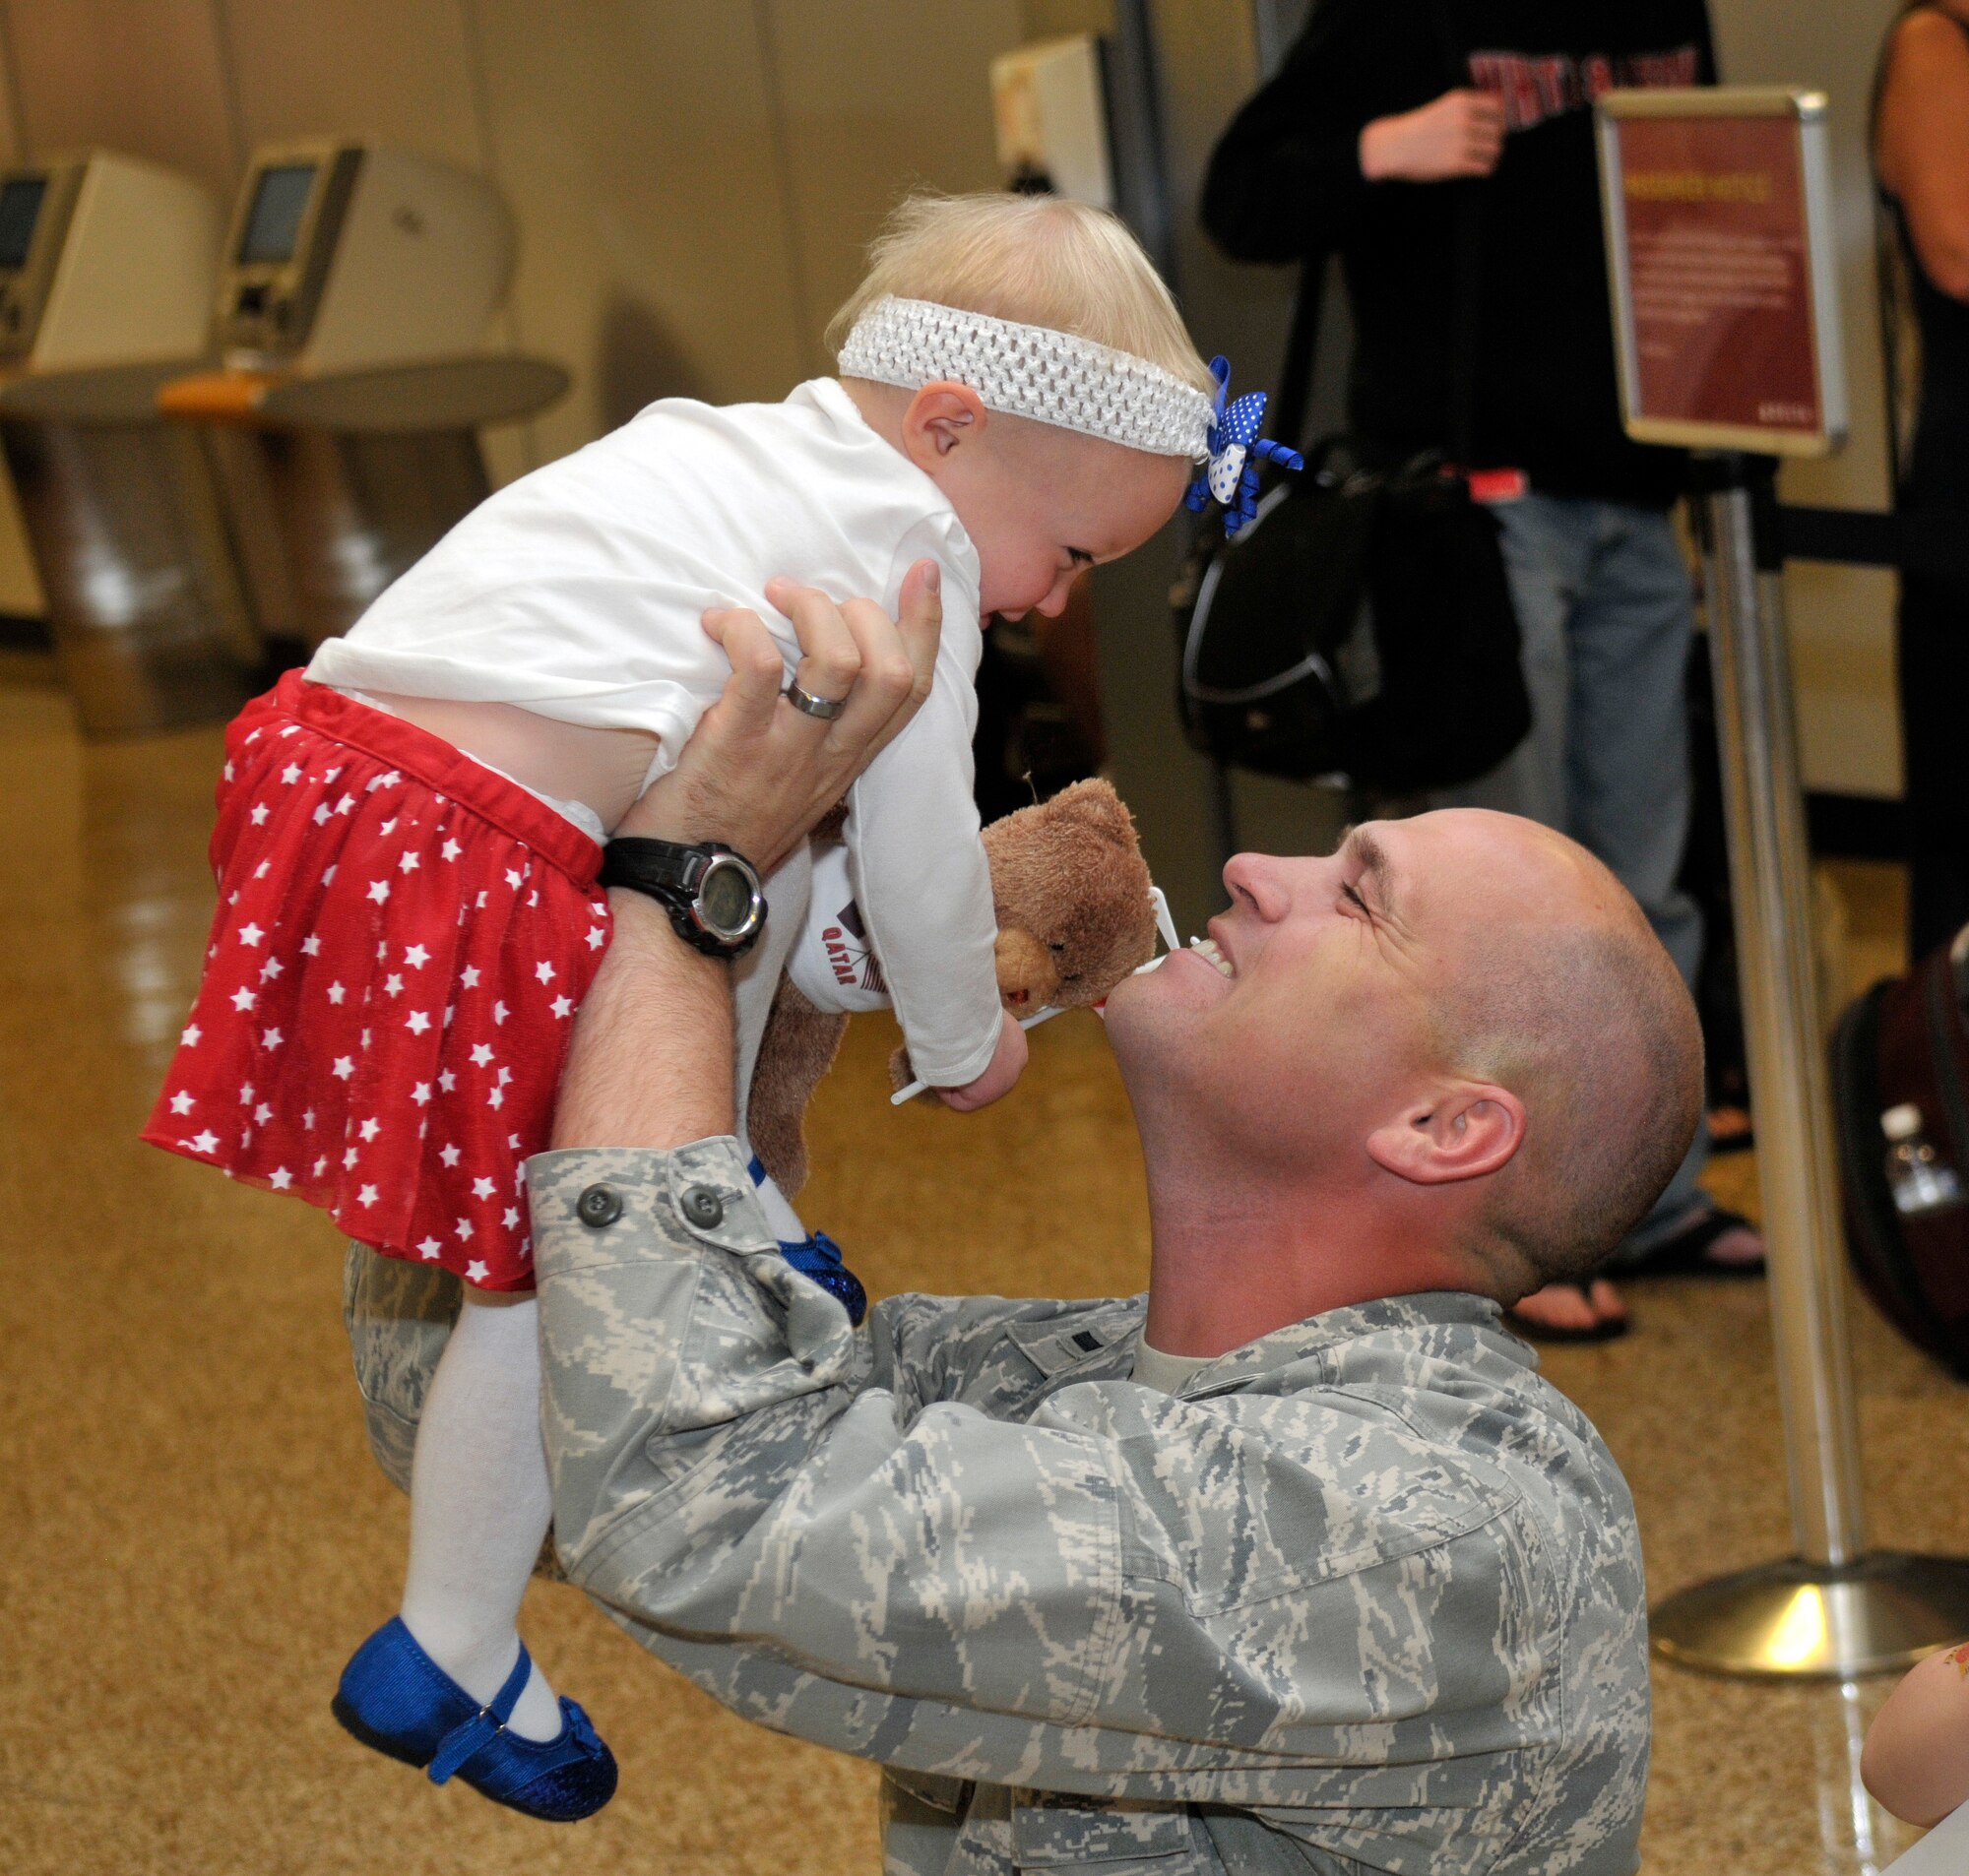 1st Lt. Brian Herrscher, 130th Engineering Installation Squadron, greets his daughter at the Salt Lake City International Airport after returning from a six-month deployment to the Middle East on Sunday Oct. 21, 2012. Herrscher, along with 13 others from the 130th EIS were deployed to the Middle East in support of Operation Enduring Freedom. (U.S. Air Force Photo by Tech. Sgt. Jeremy Giacoletto-Stegall/Released)